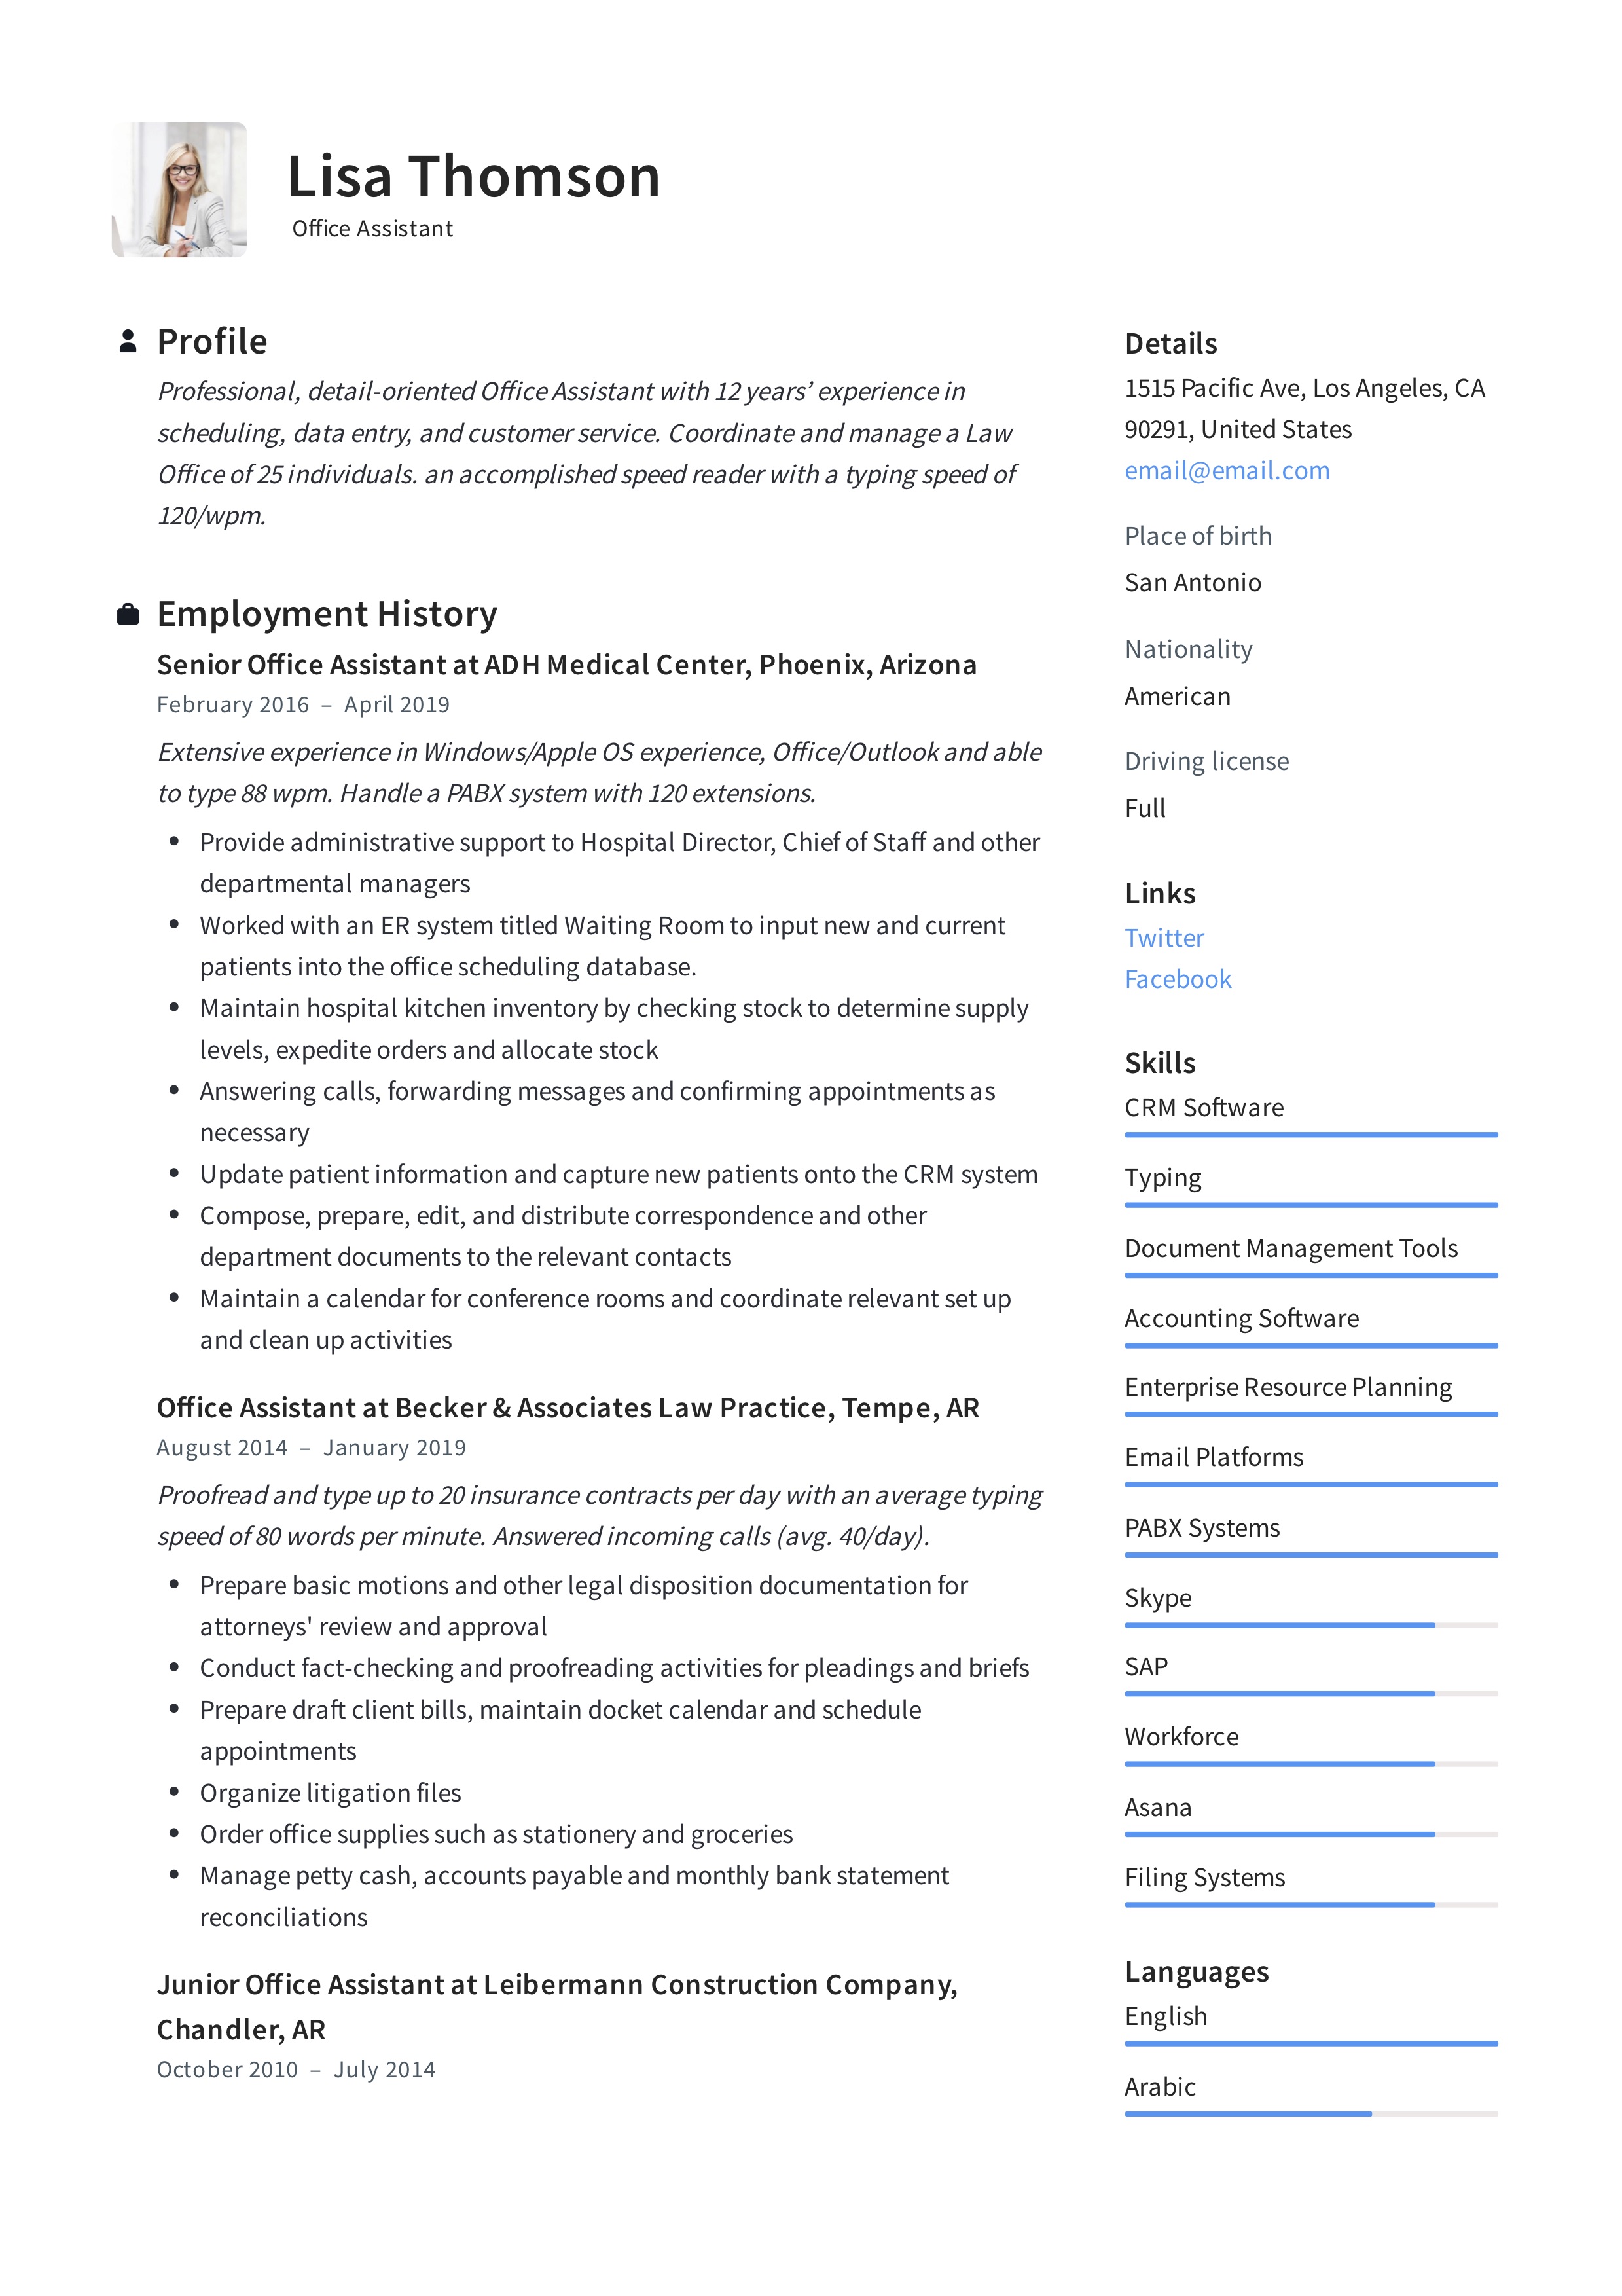 Office Assistant Resume + Writing Guide  12 Resume TEMPLATES  2019